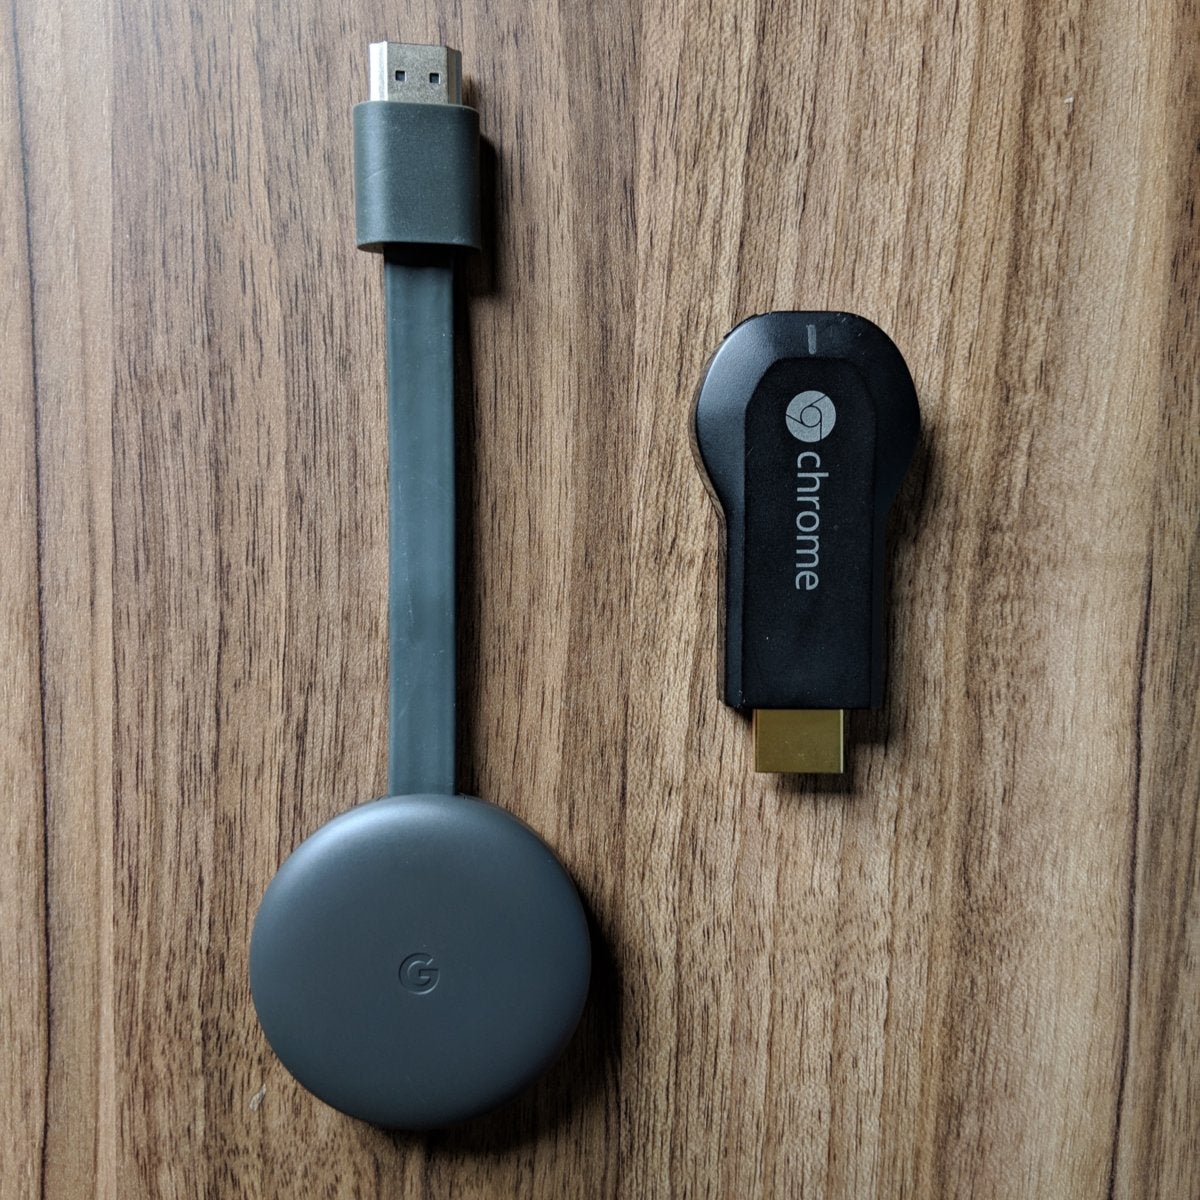 Chromecast (2018) review: Google's revamped media is you make of it | TechHive